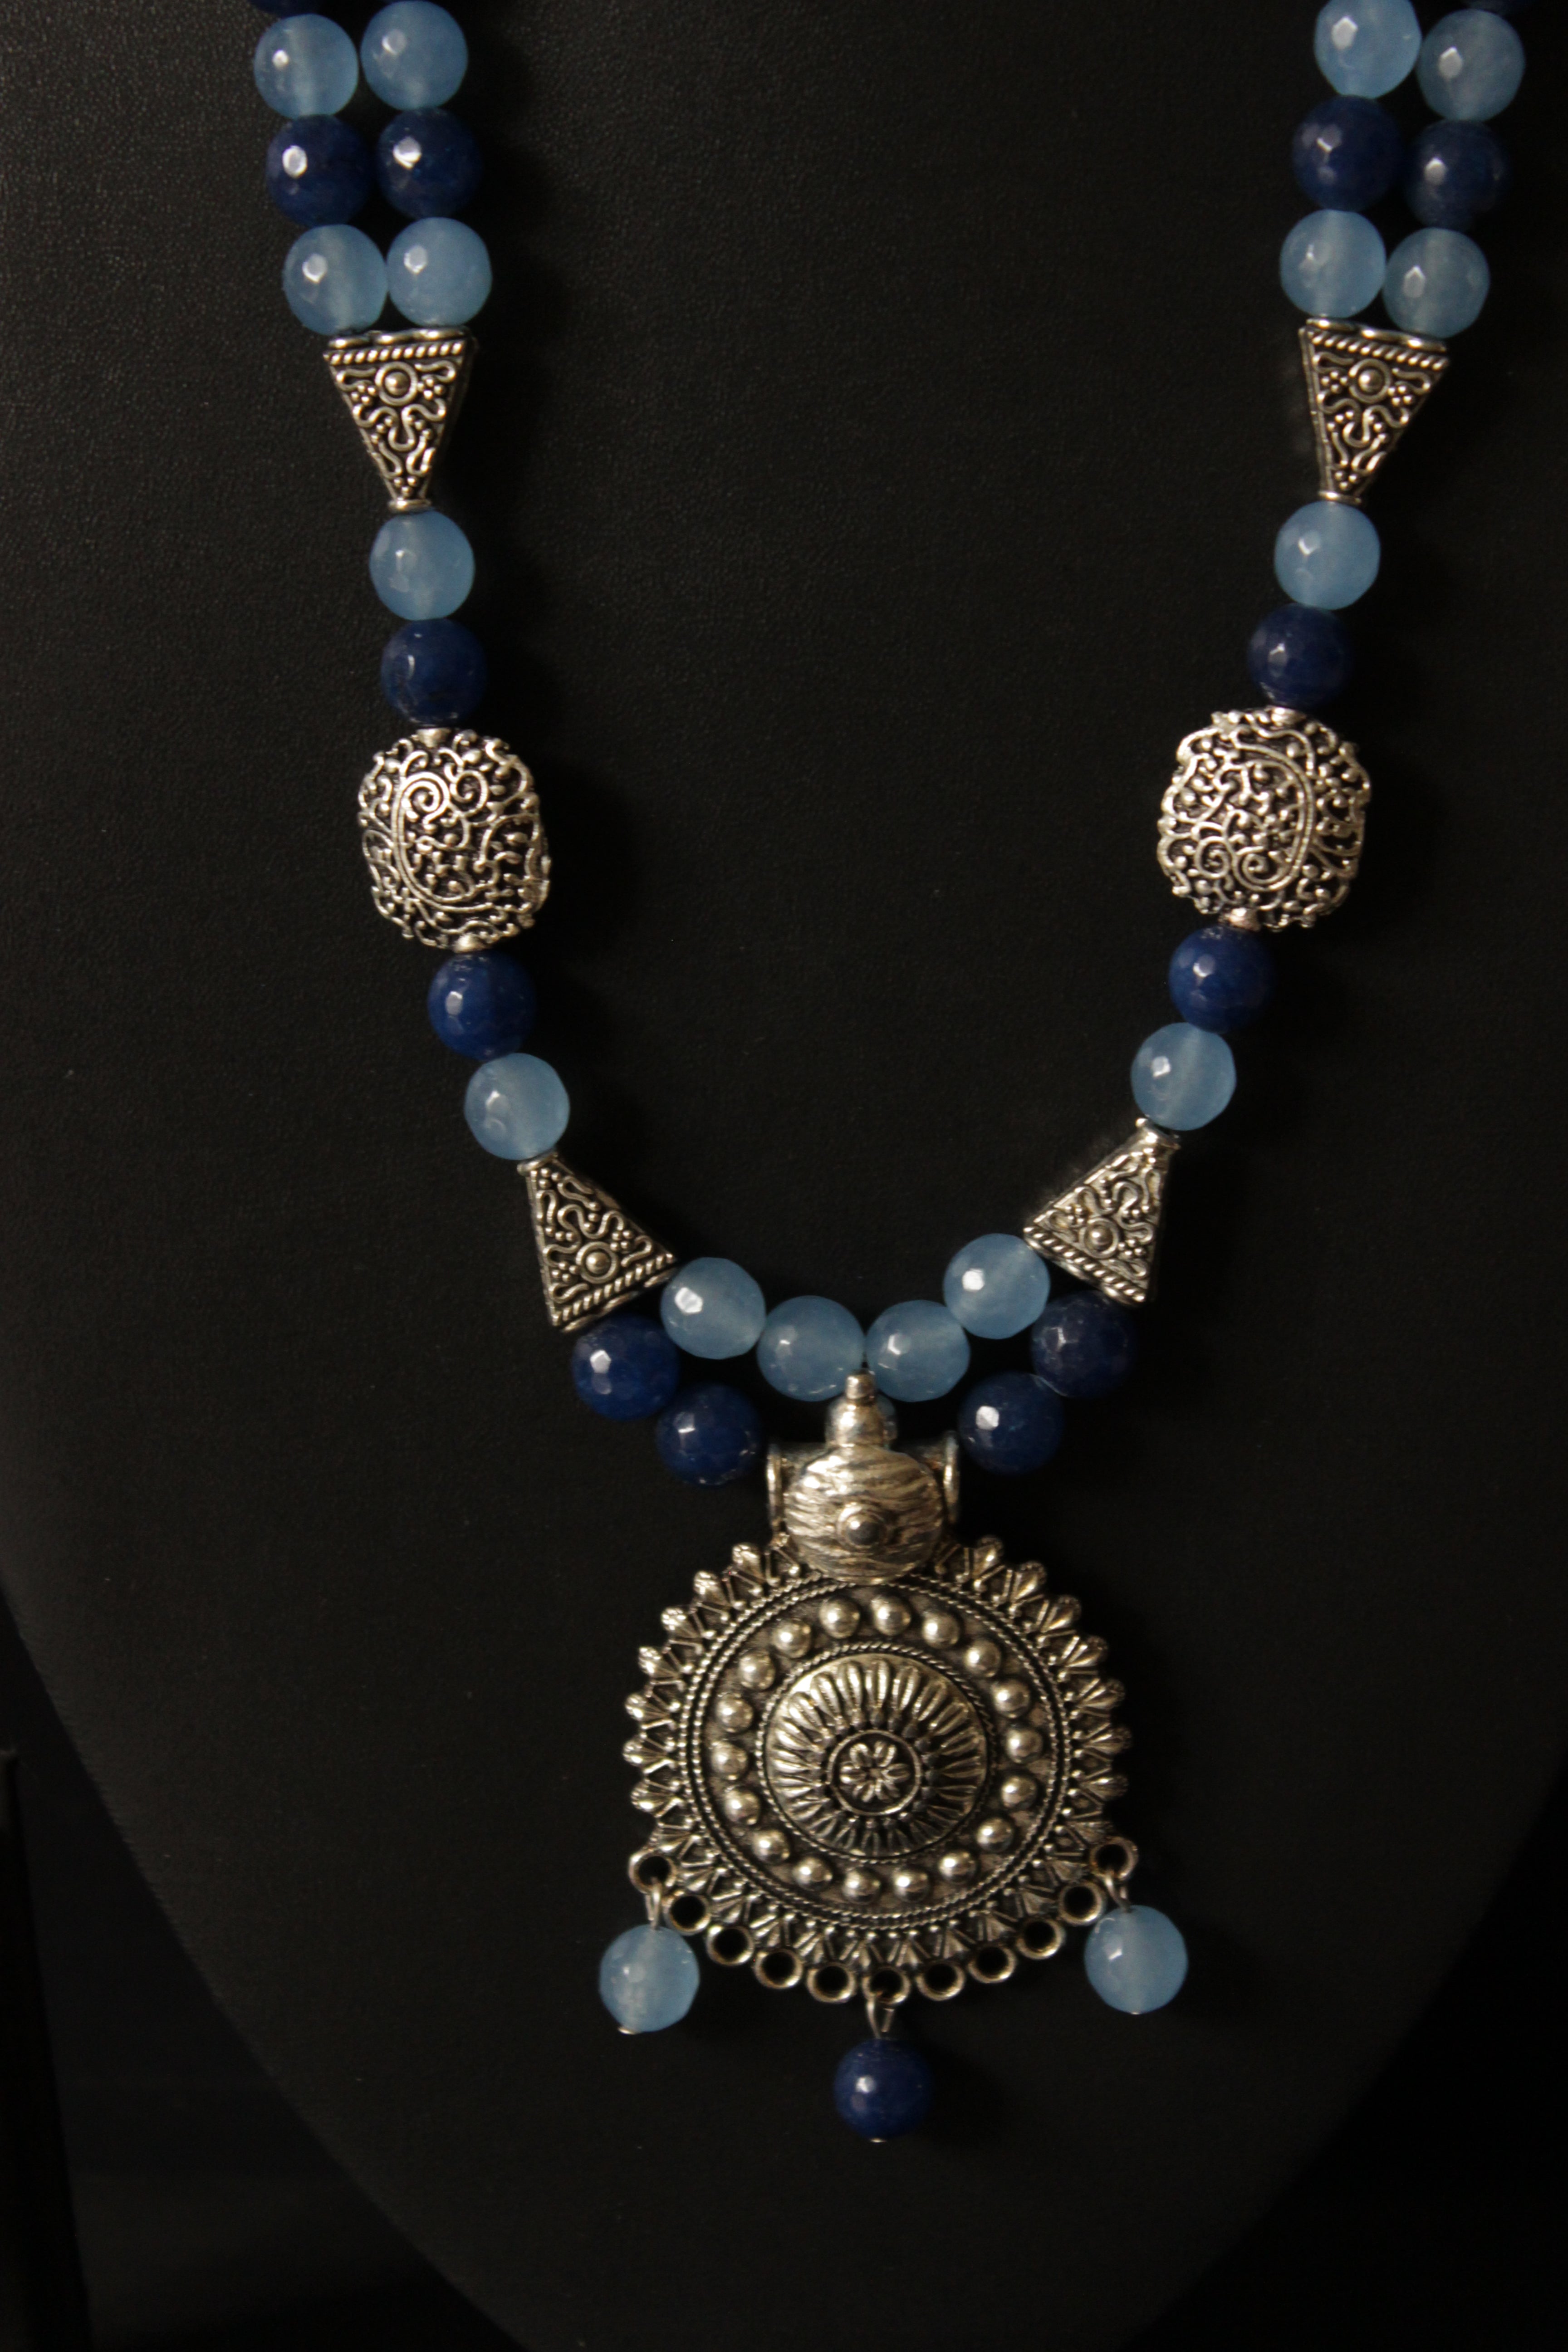 Shades of Blue Jade Beads Metal Pendant Necklace Set